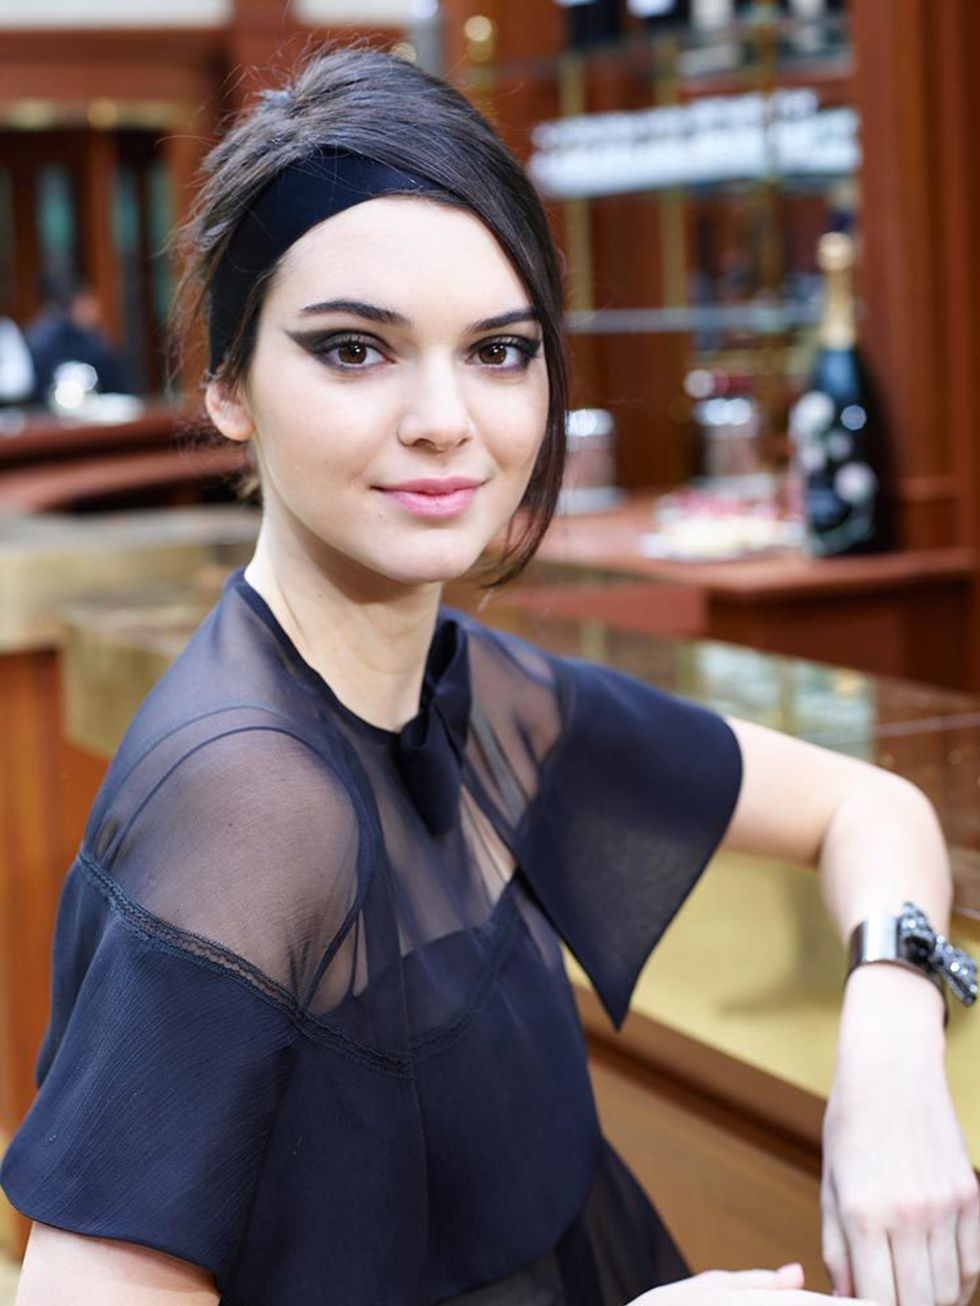 Kendall sports a dramatic eye flick, courtesy of Tom Pecheux, during the Chanel show, March 2015.